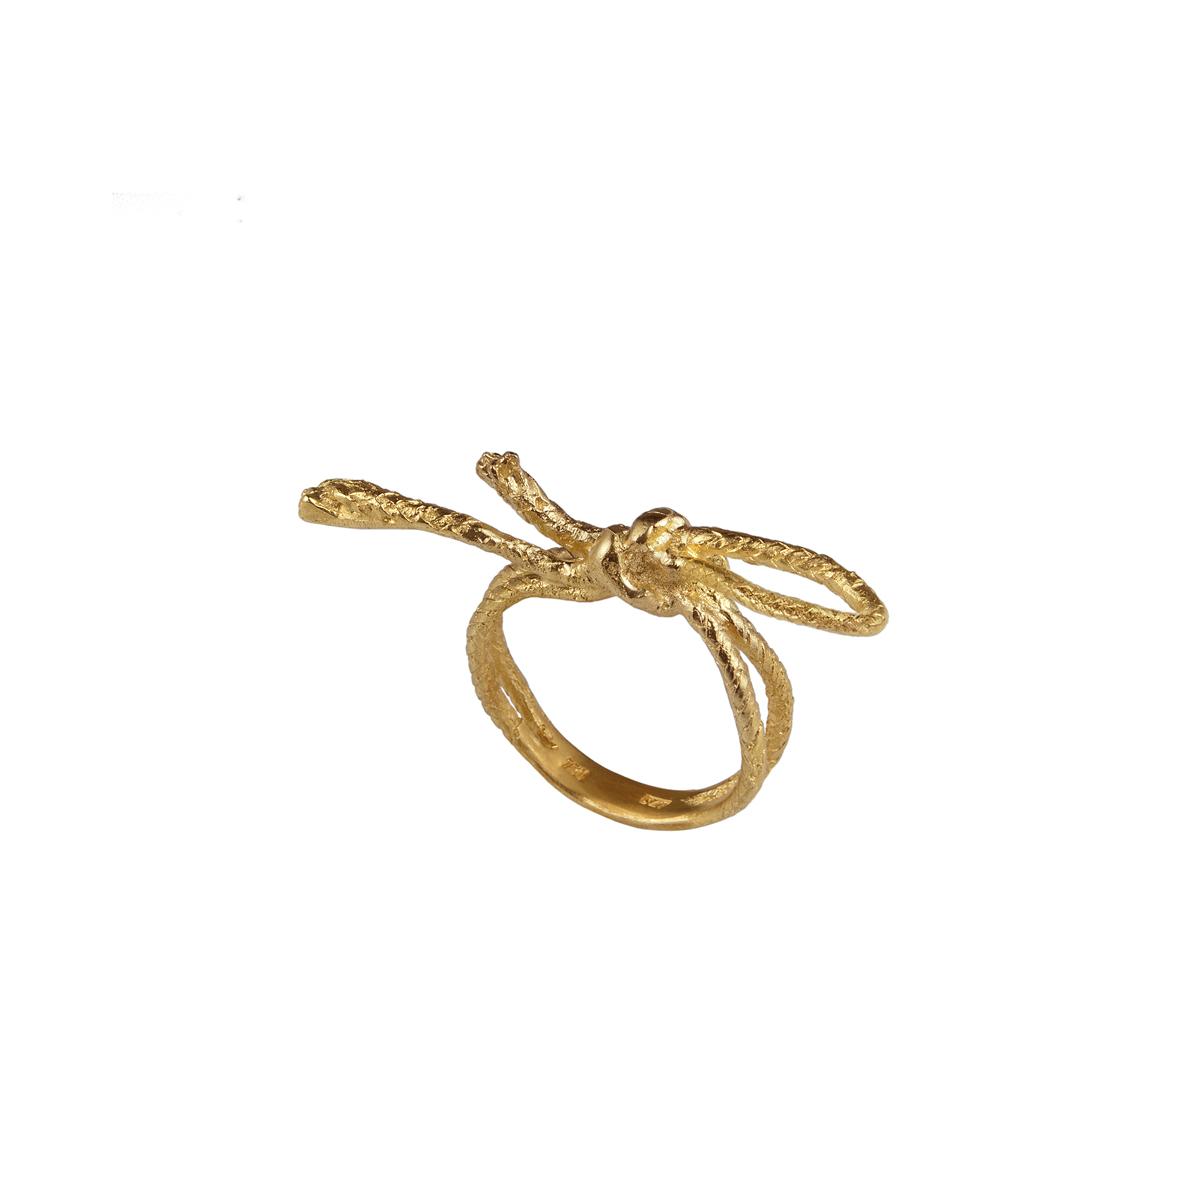 Ring on String - Cord